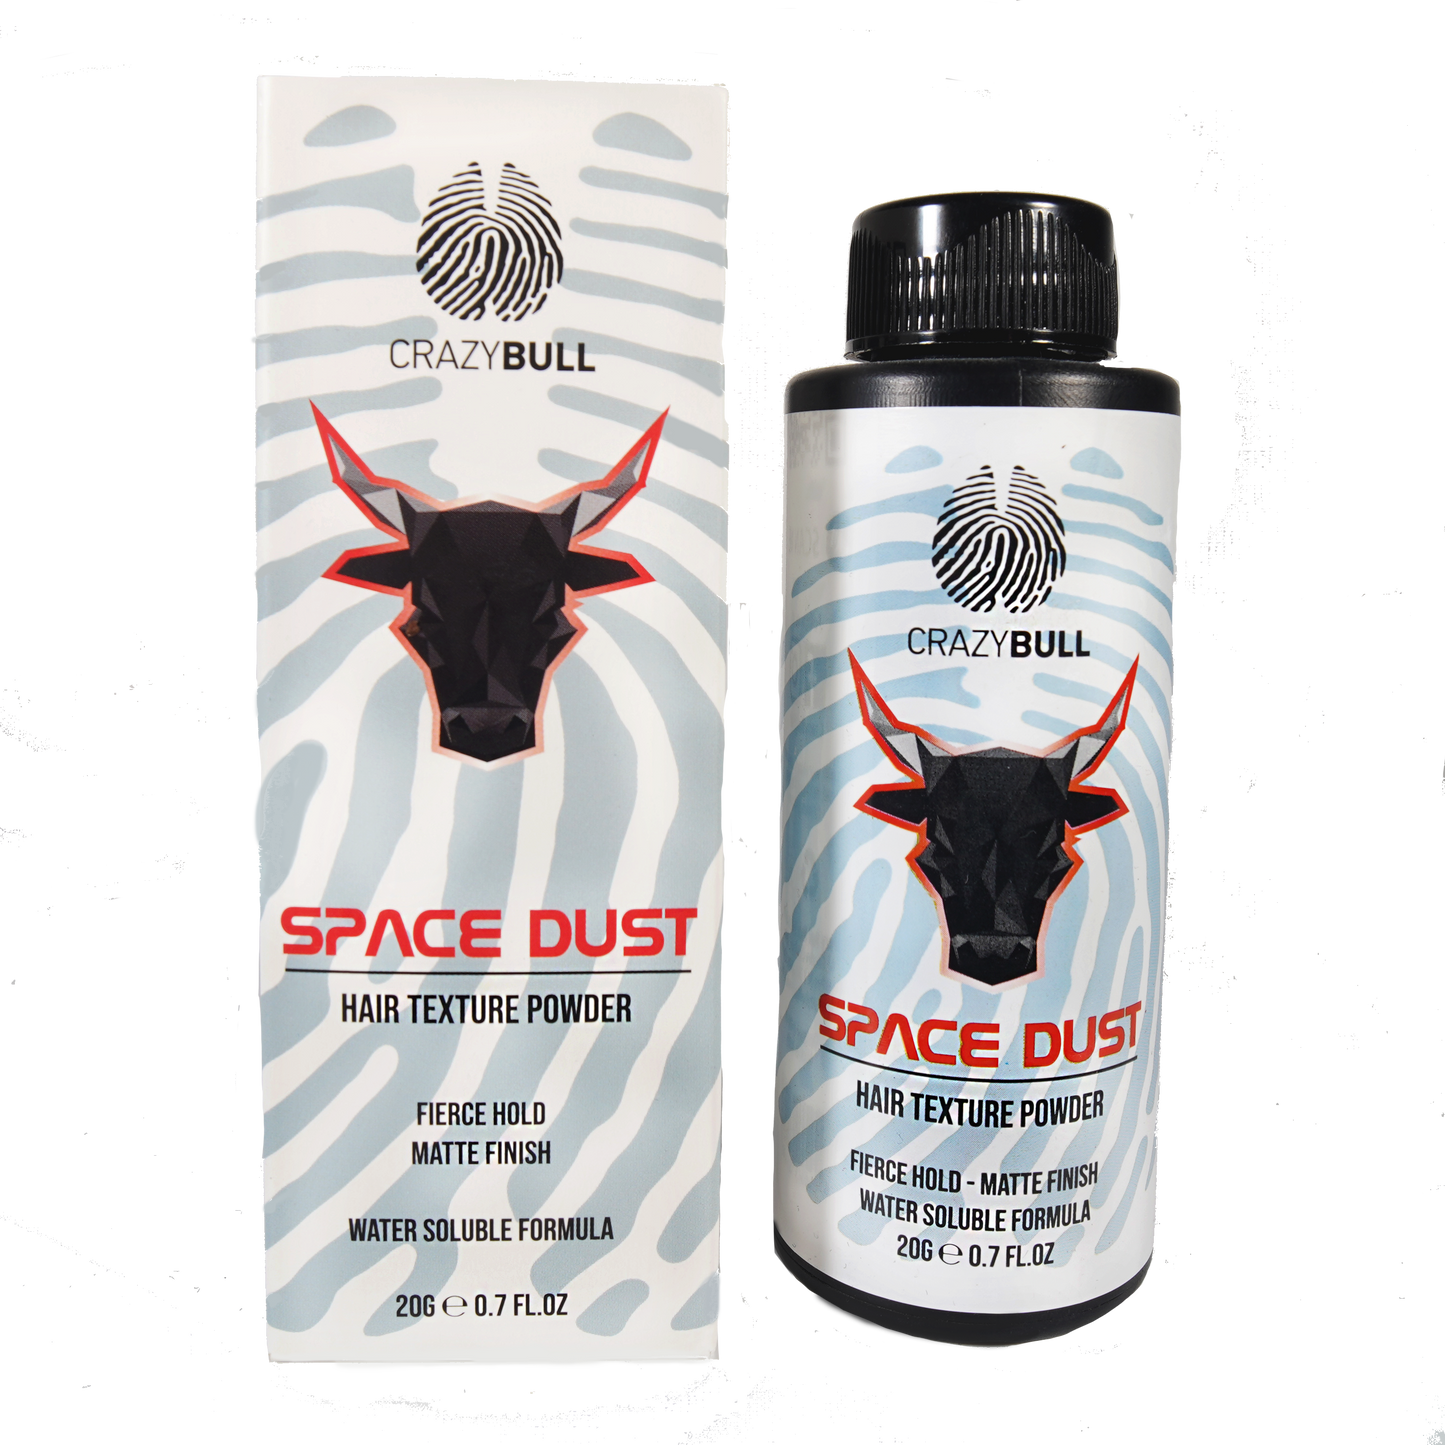 Crazy Bull Space Dust Hair Texture Styling Powder